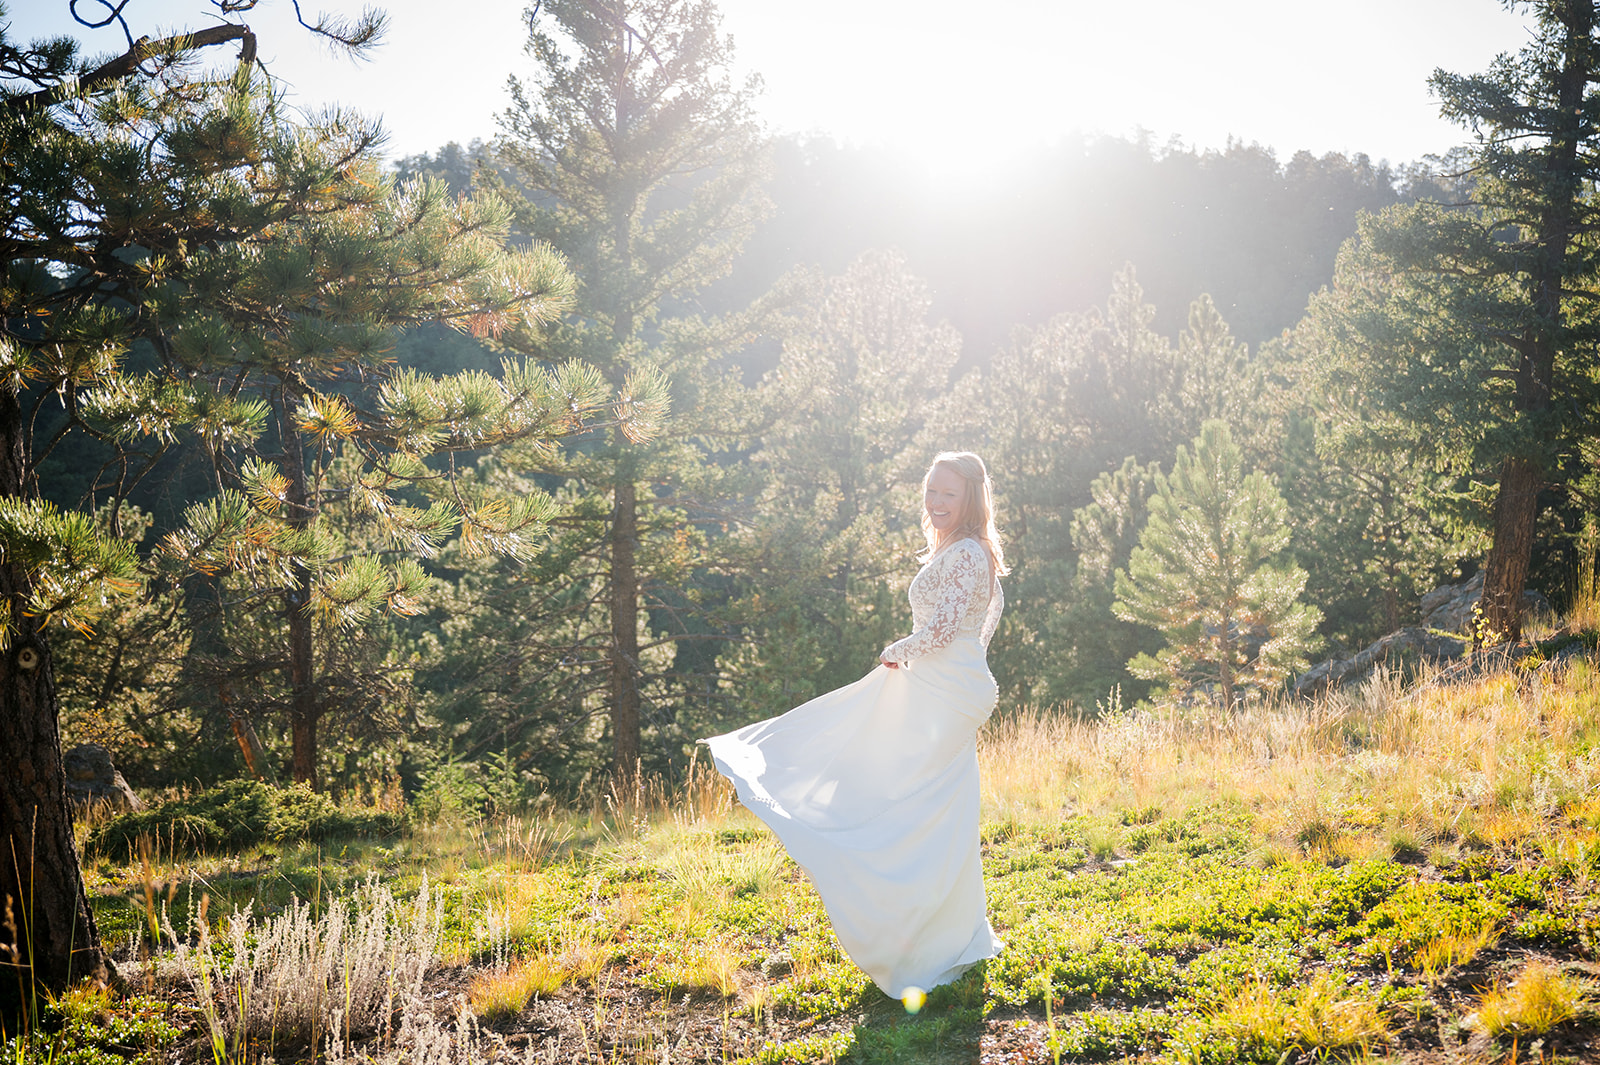 The bride twirls her dress with the sun setting during golden hour behind her.